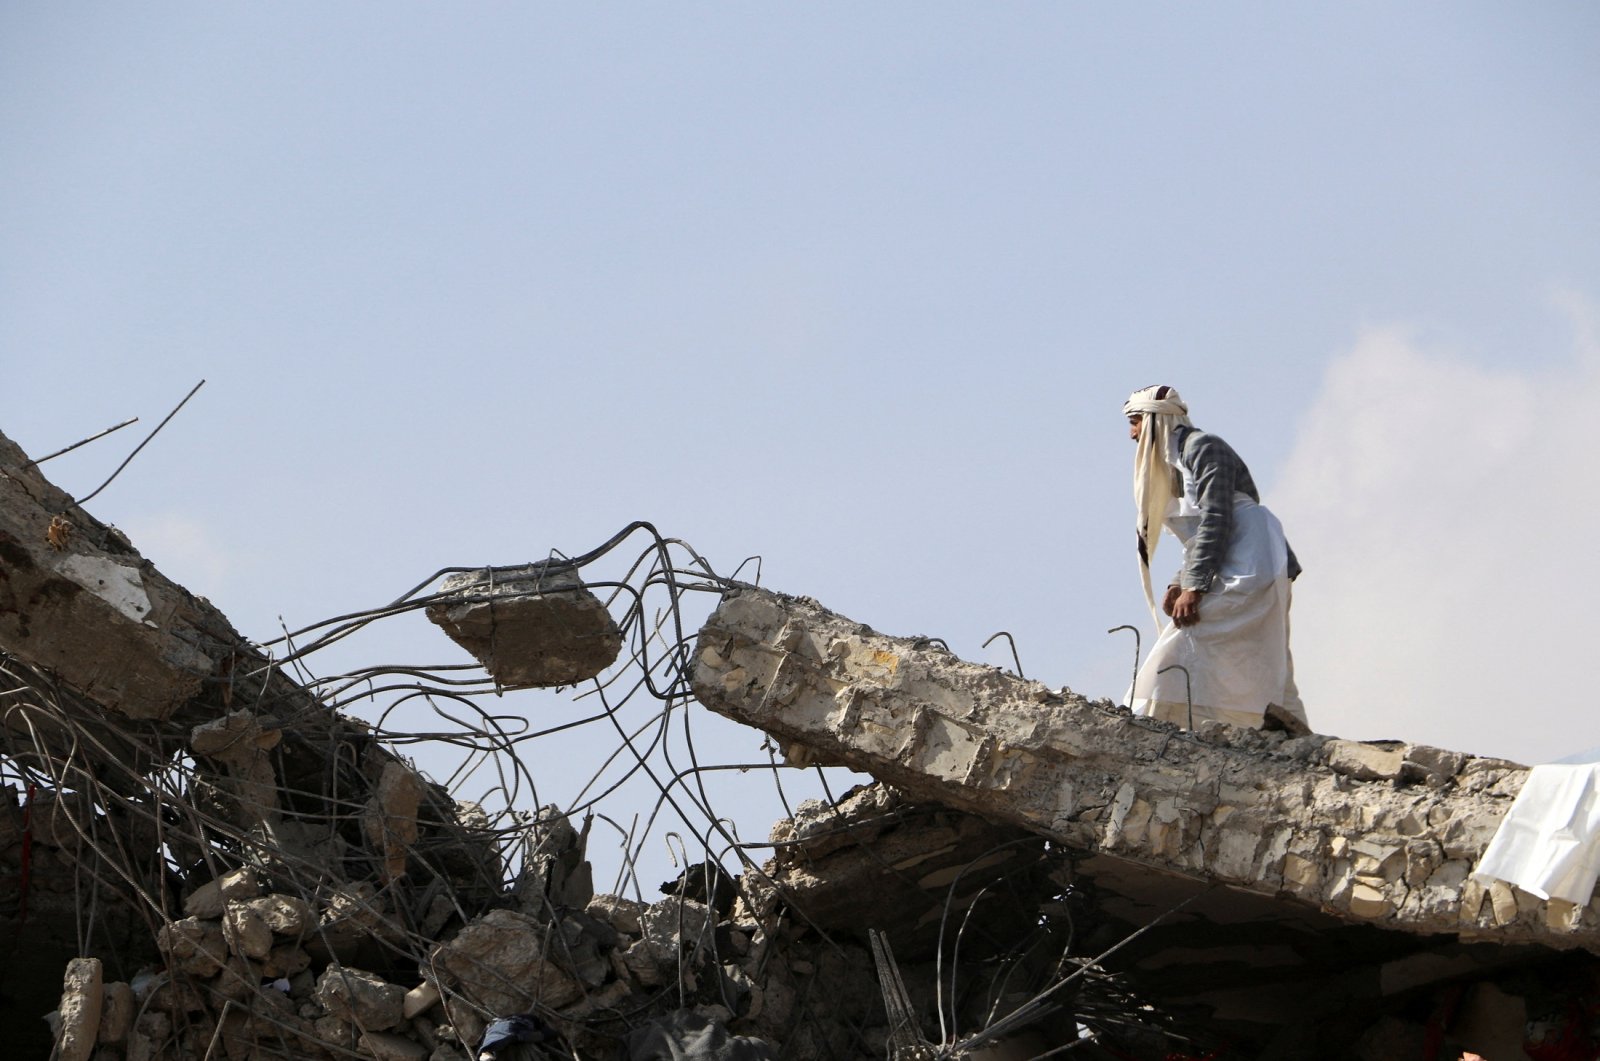 A man walks on the collapsed roof of a detention center hit by air strikes in Saada, Yemen, Jan. 21, 2022. (Reuters Photo)